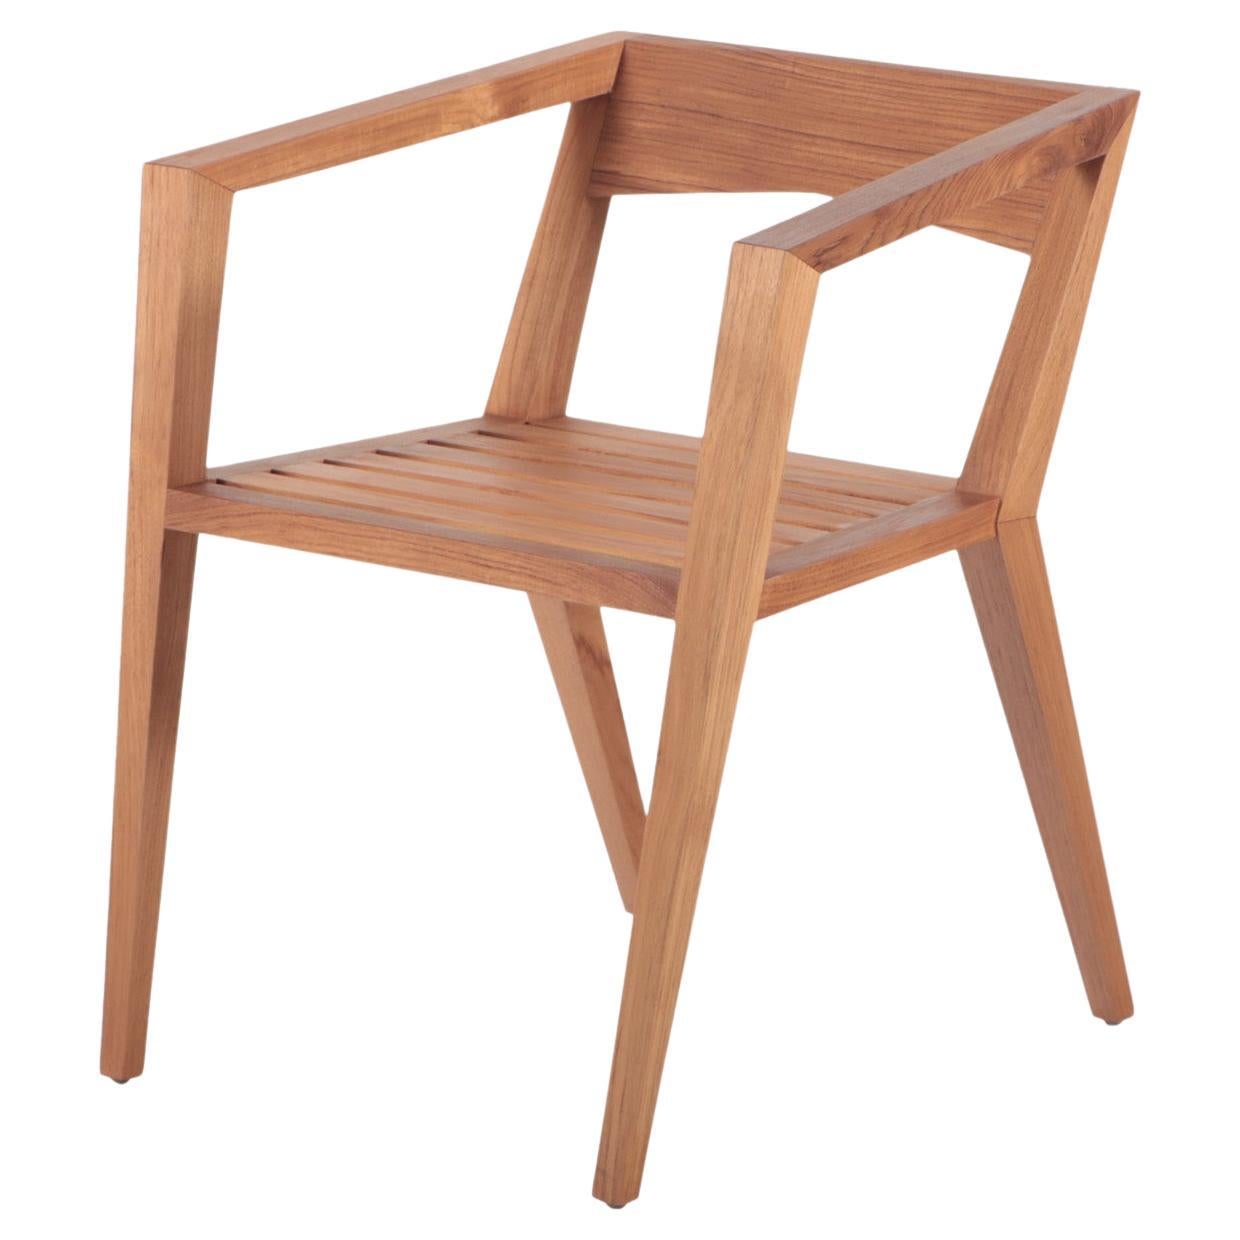 "Zoo" Oiled Indoor Solid Teak  Dining Chair, by Maximilian Eicke for Max ID NY